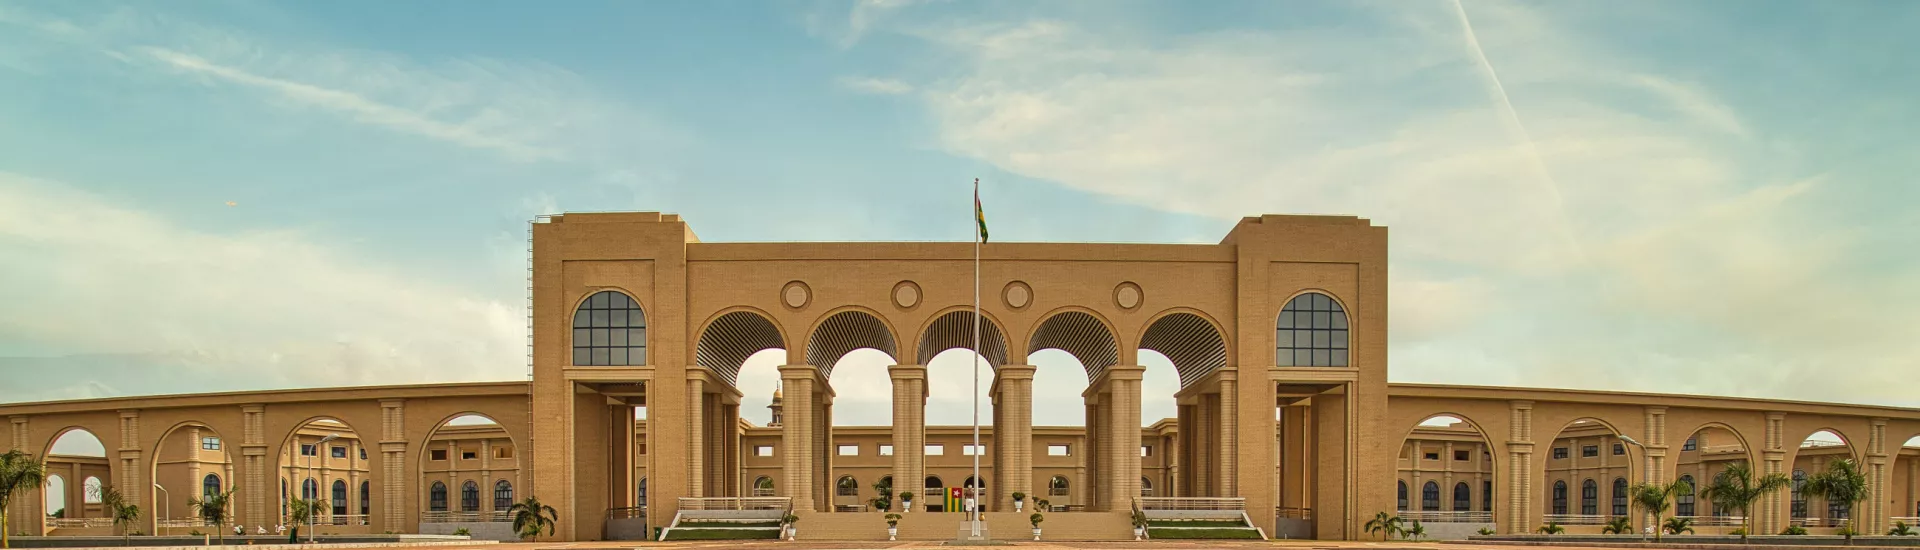 The new building of the National Assembly, Togo